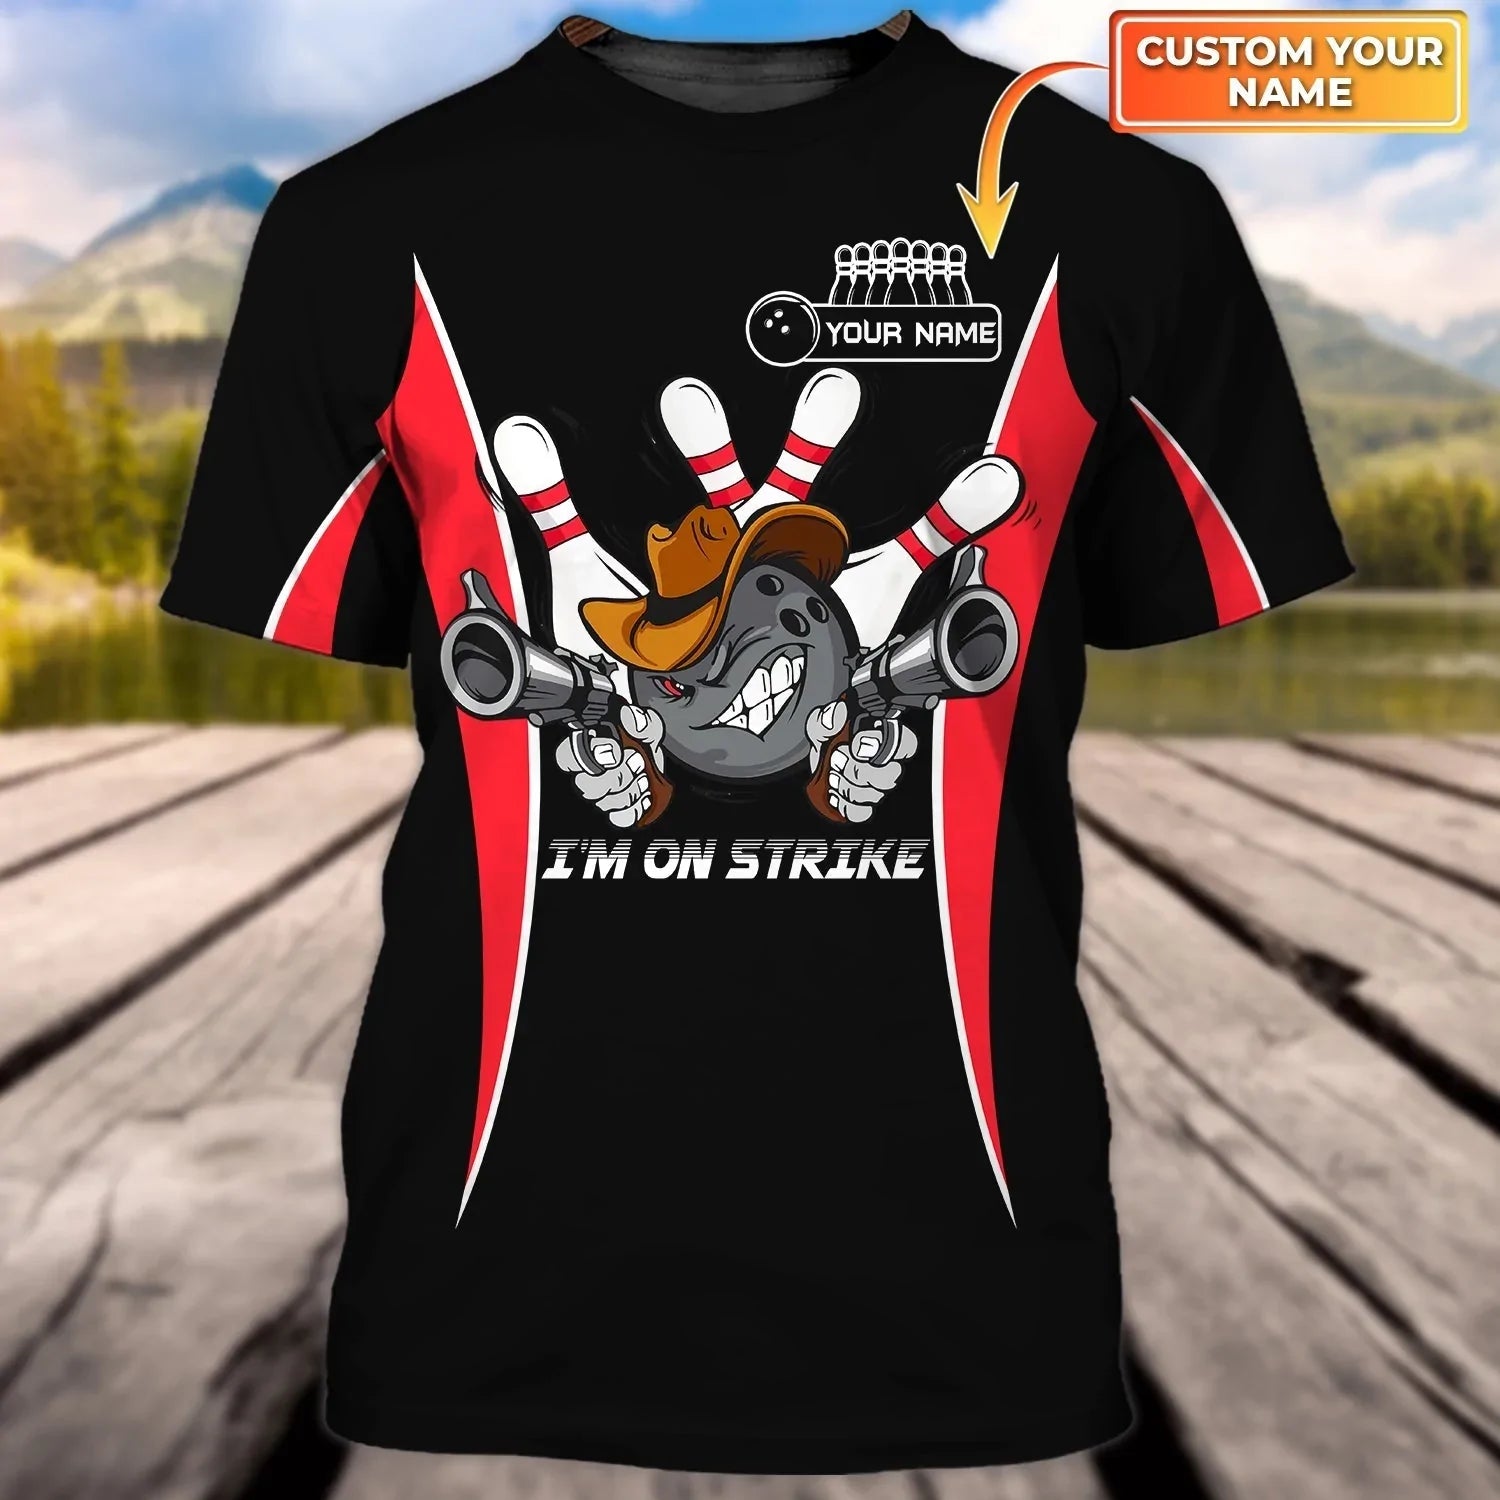 Customized Black Bowling T-Shirt with 3D All-Over Print, Featuring “I’m On Strike” Design – Hilarious and Unique Bowling Shirts – BT005